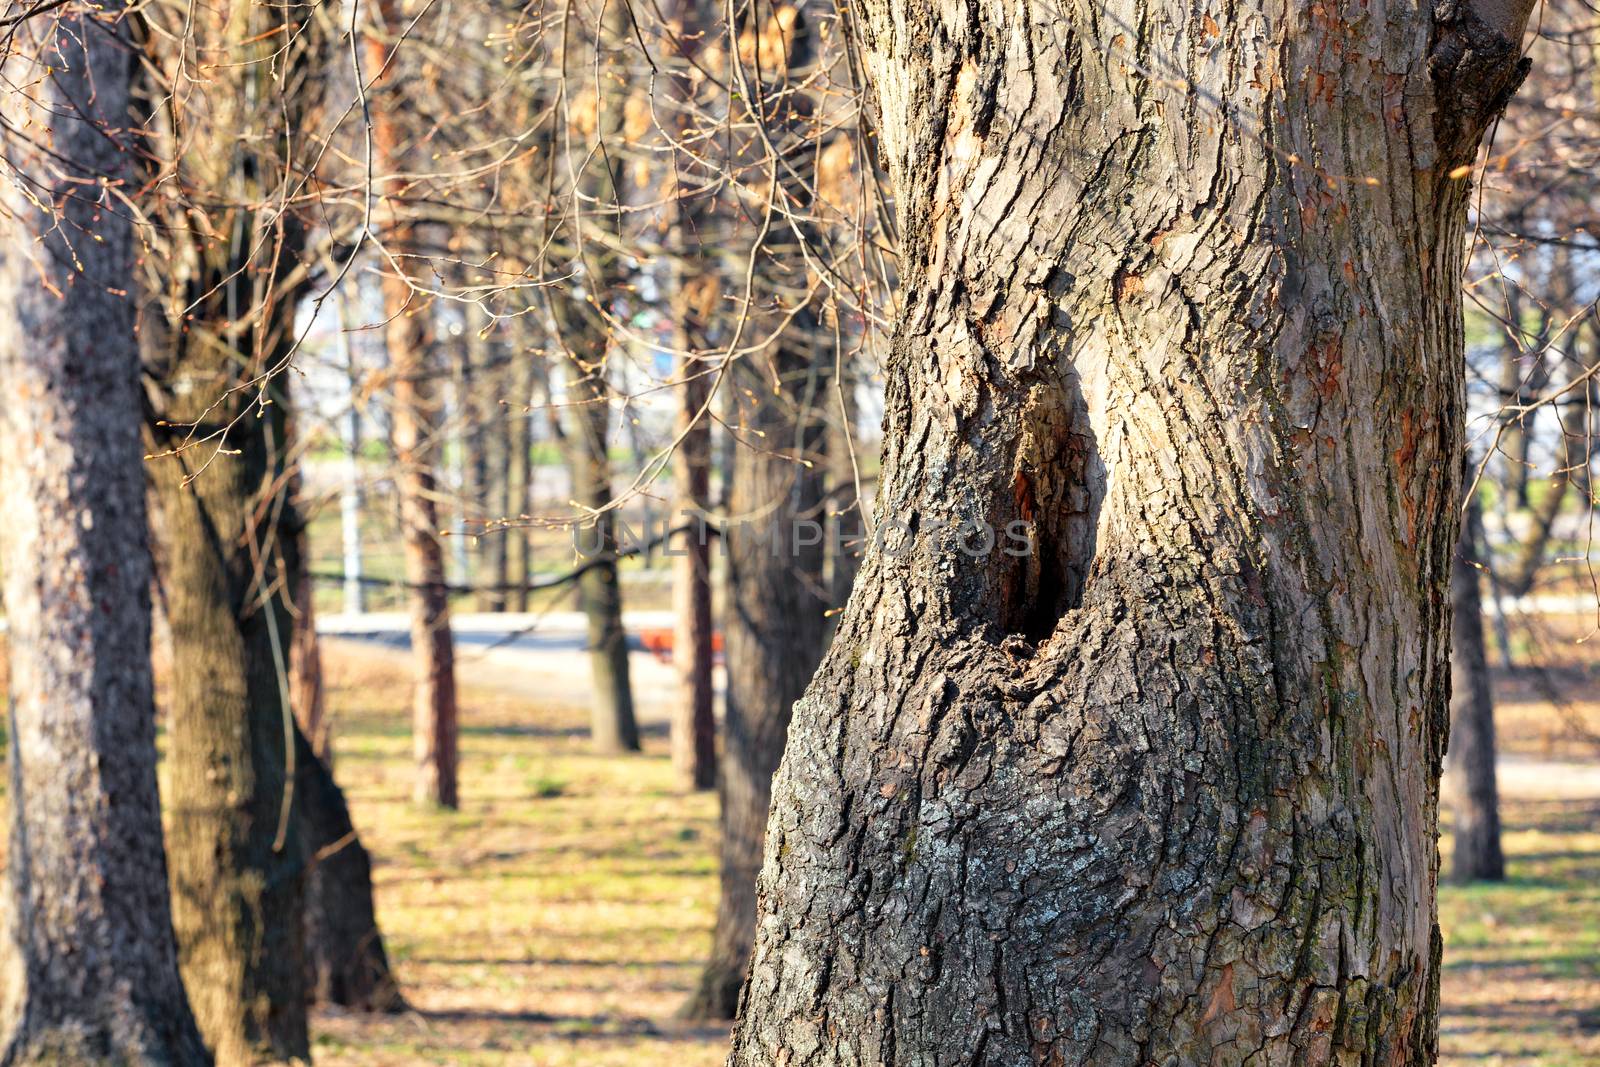 An old hollow in a tall pine as a dwelling for a squirrel against the background of a spring city park in blur.